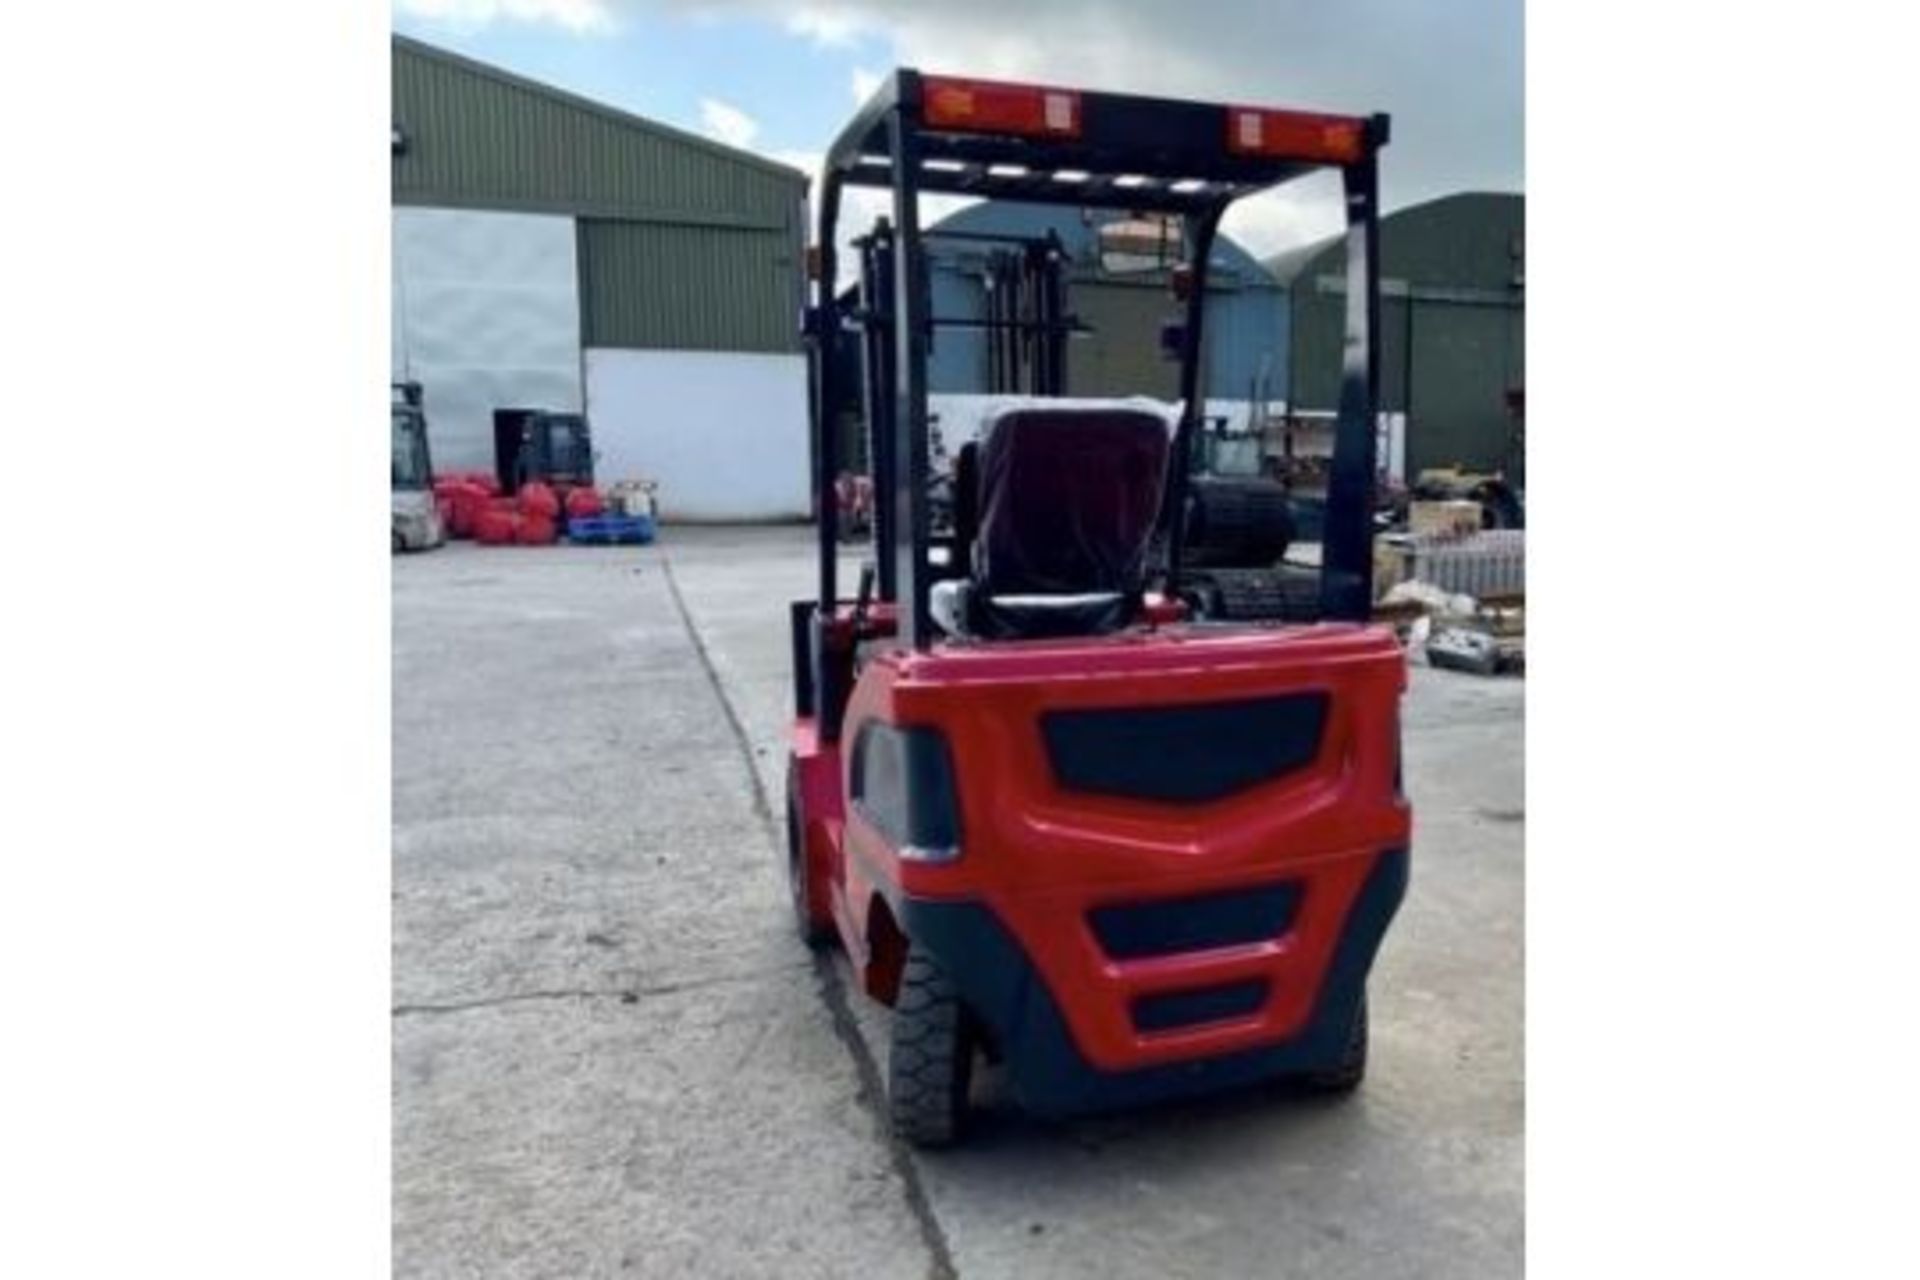 STIPP CPD-15 ELECTRIC FORKLIFT TRUCK - Image 9 of 12